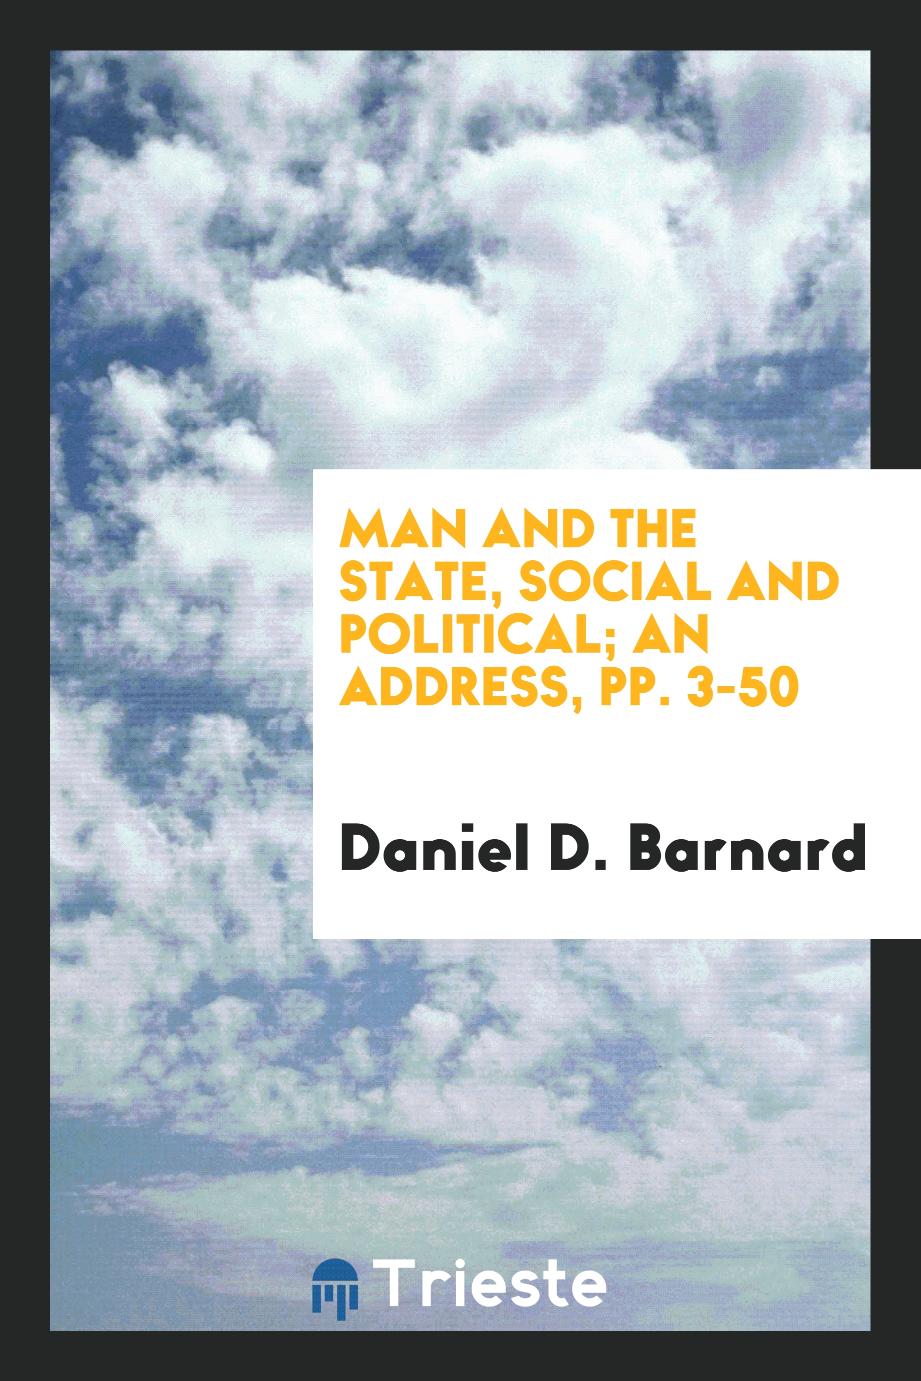 Man and the State, Social and Political; An Address, pp. 3-50